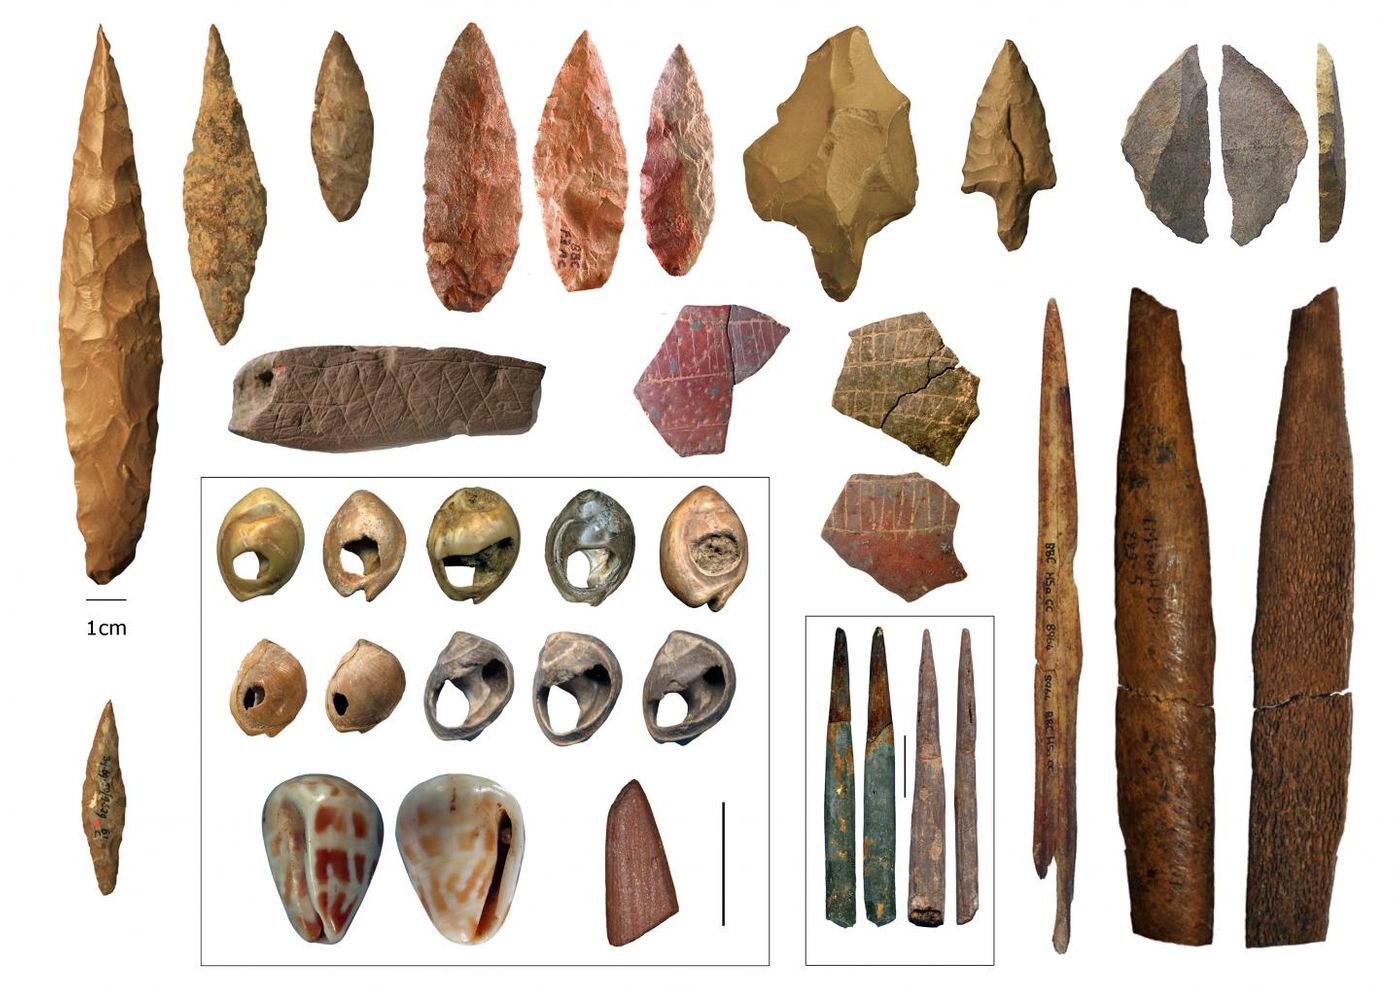 Middle Stone Age cultural artefacts from northern and southern Africa. / Credit Eleanor Scerri/Francesco d'Errico/Christopher Henshilwood